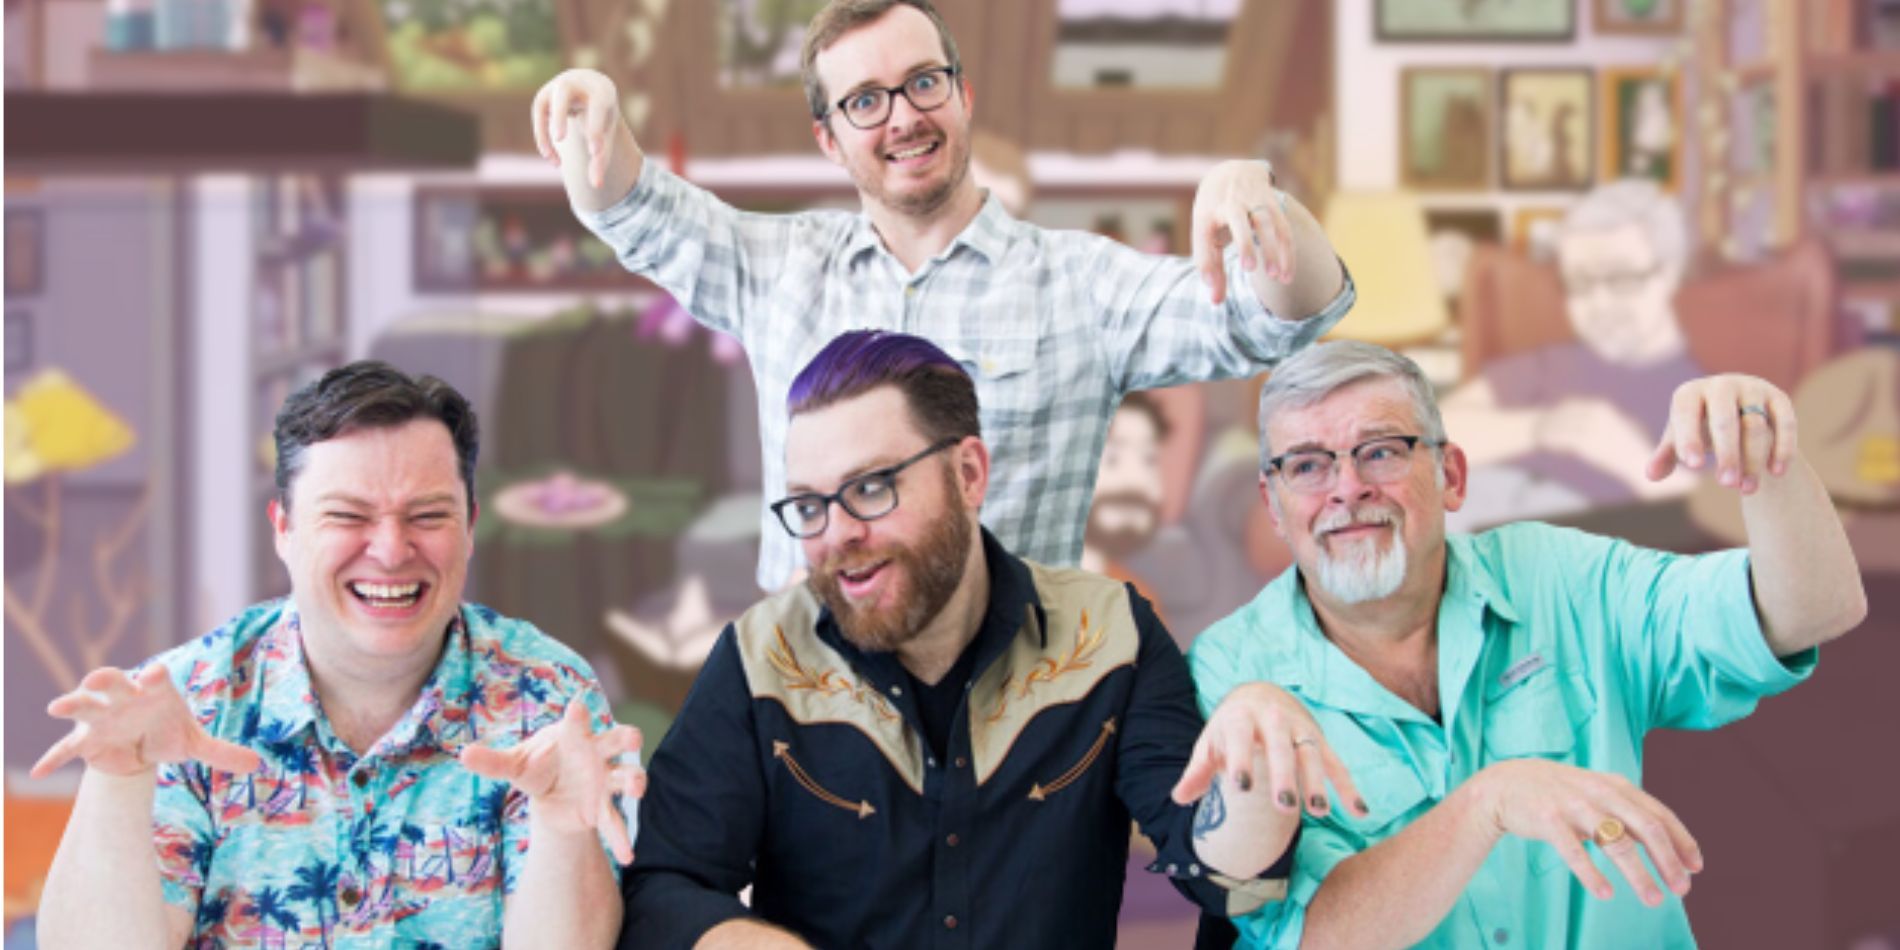 The Mcelroy Family Adventure Zone Lo-fi